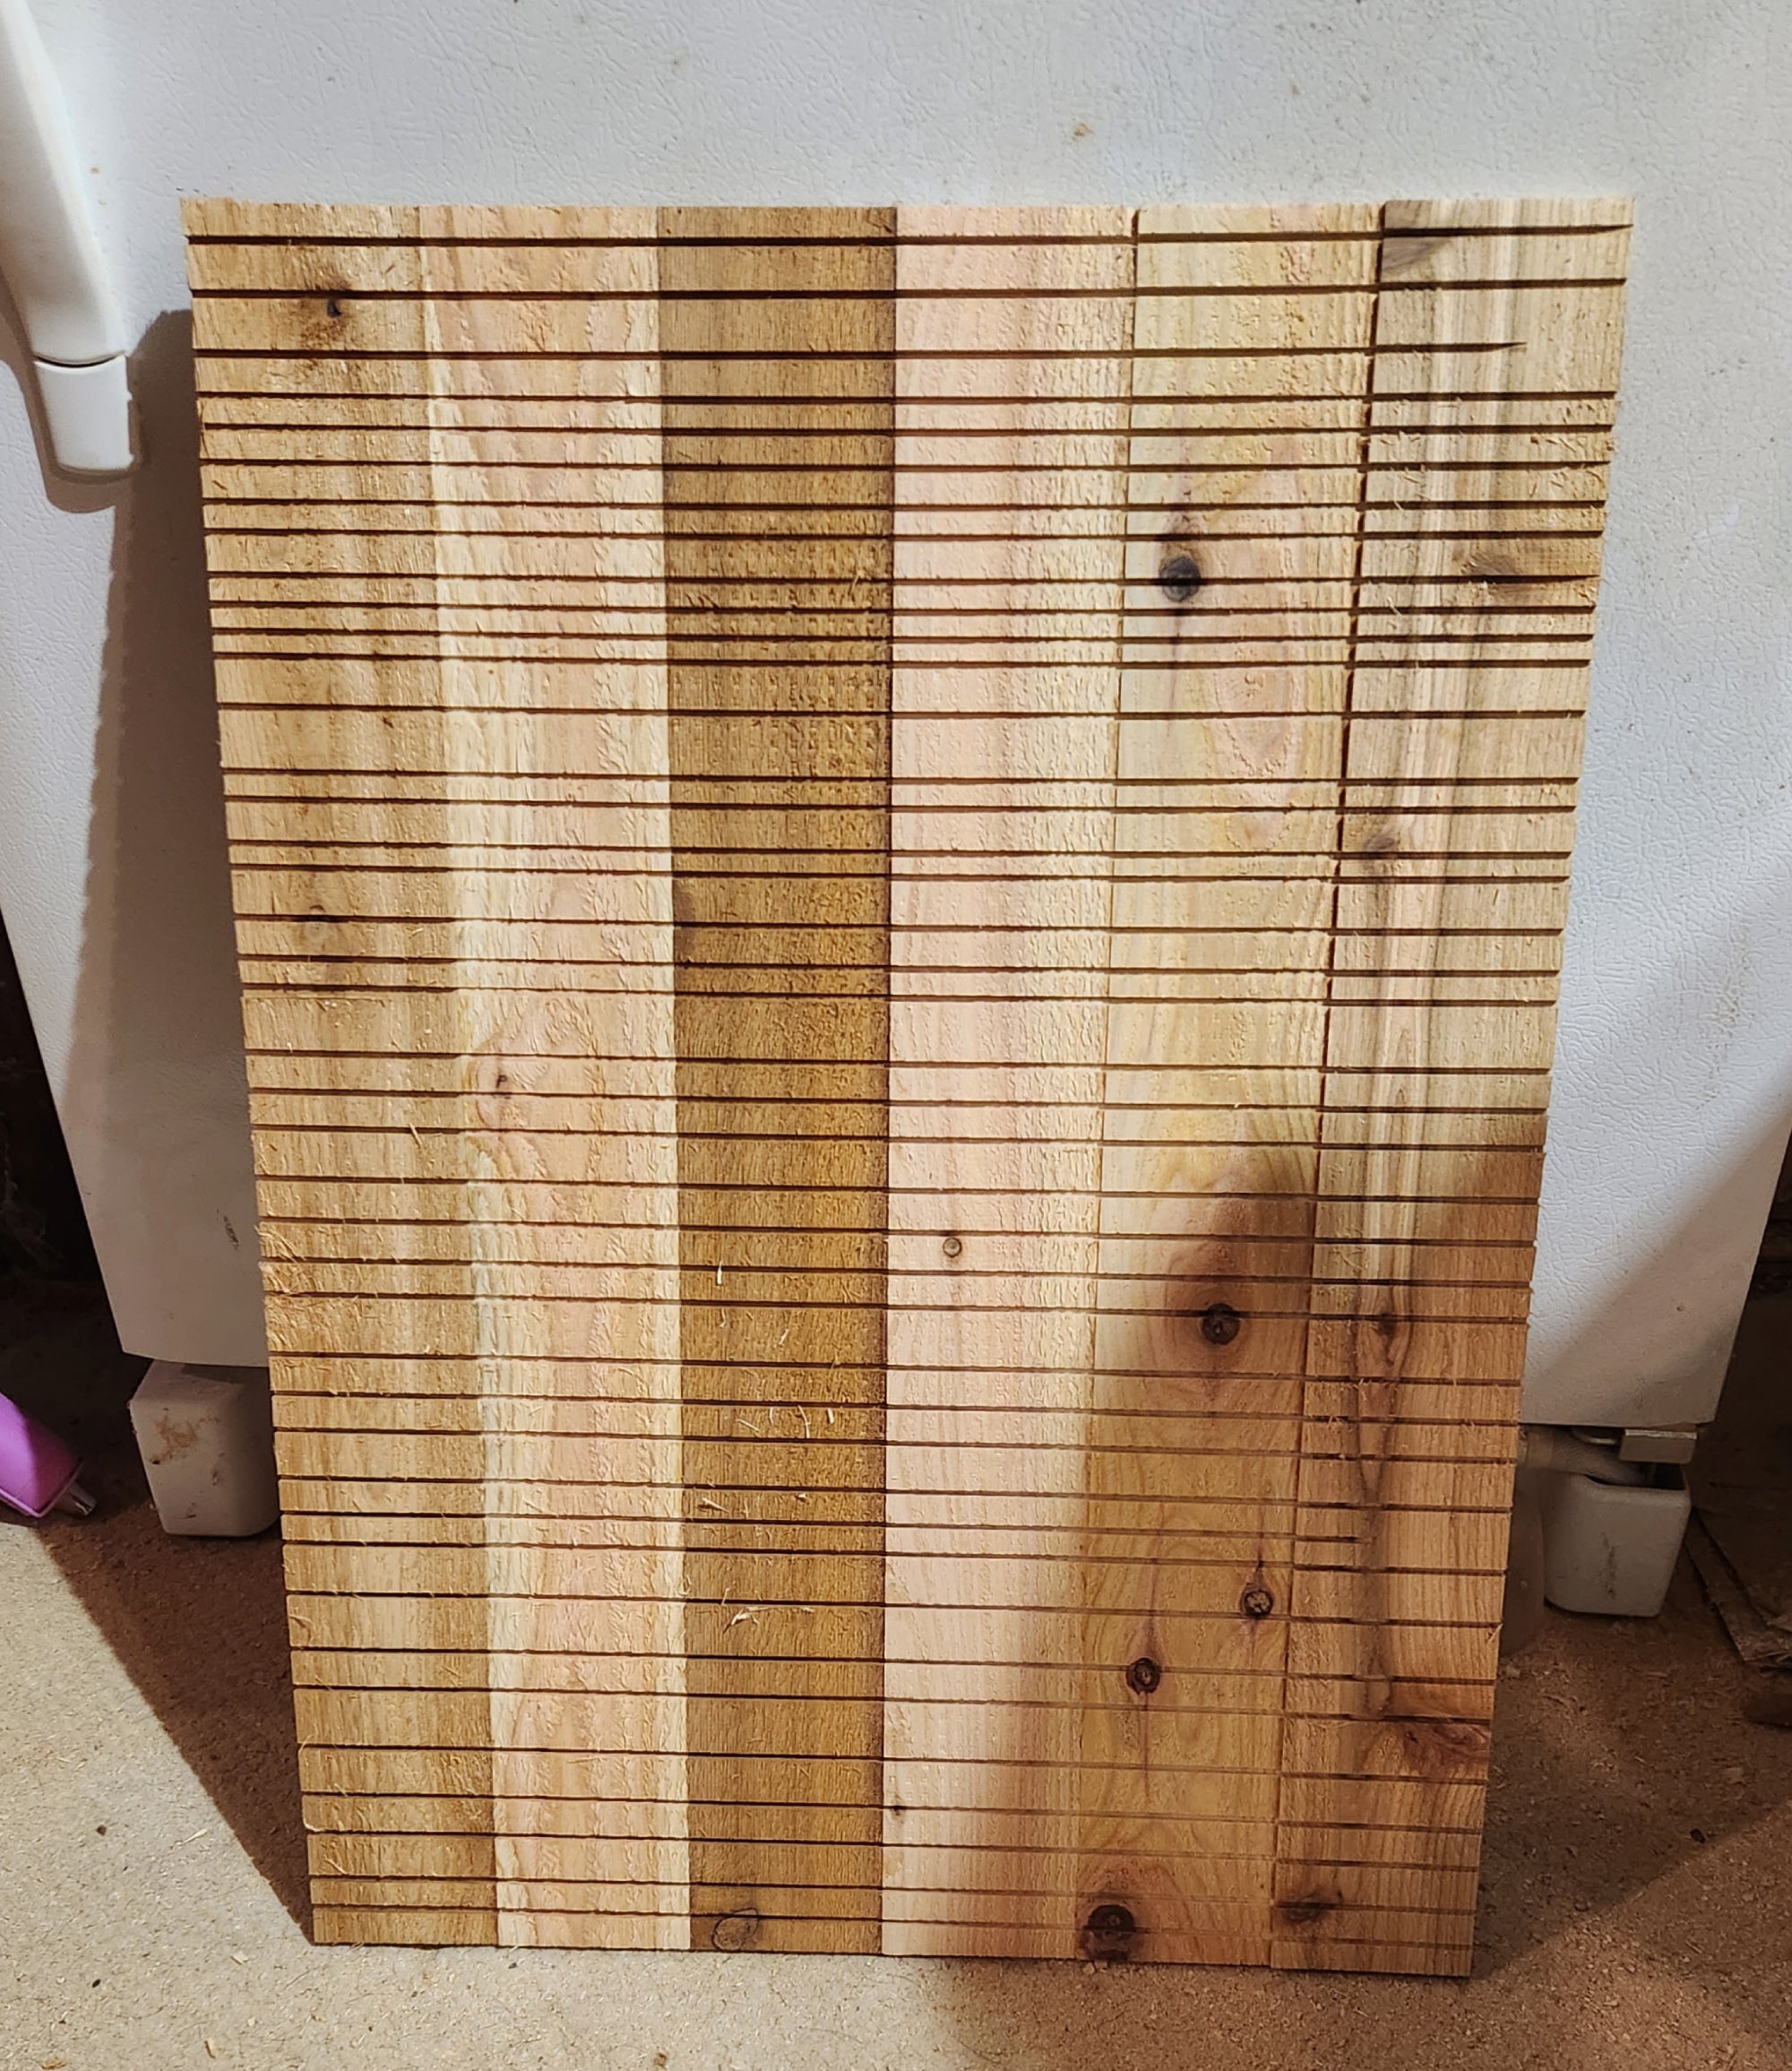 An interior panel for a DIY bat house, with groves cut into it for the bats to hold onto.